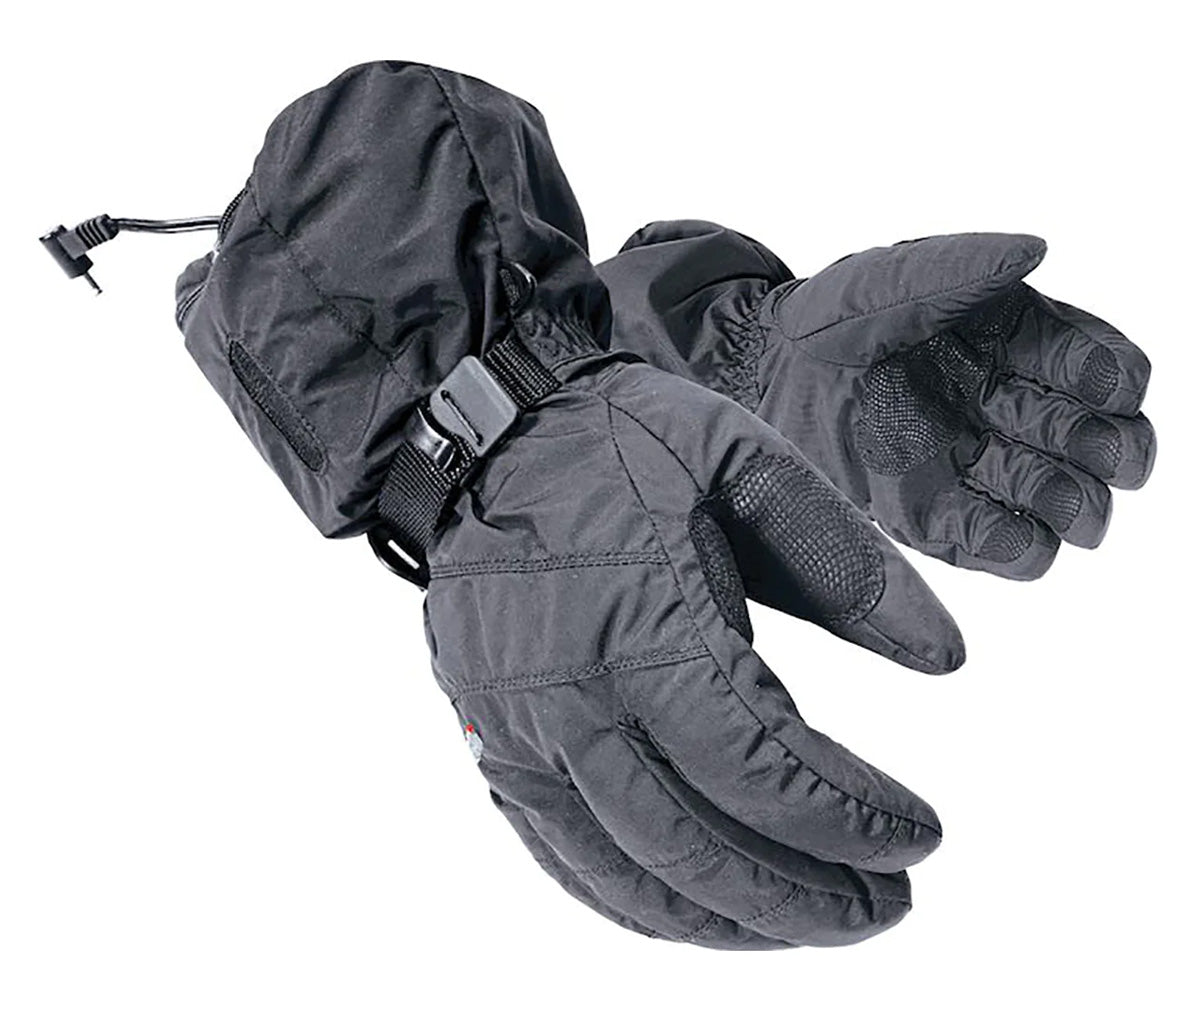 Mobile Warming Textile Heated Men's Street Gloves